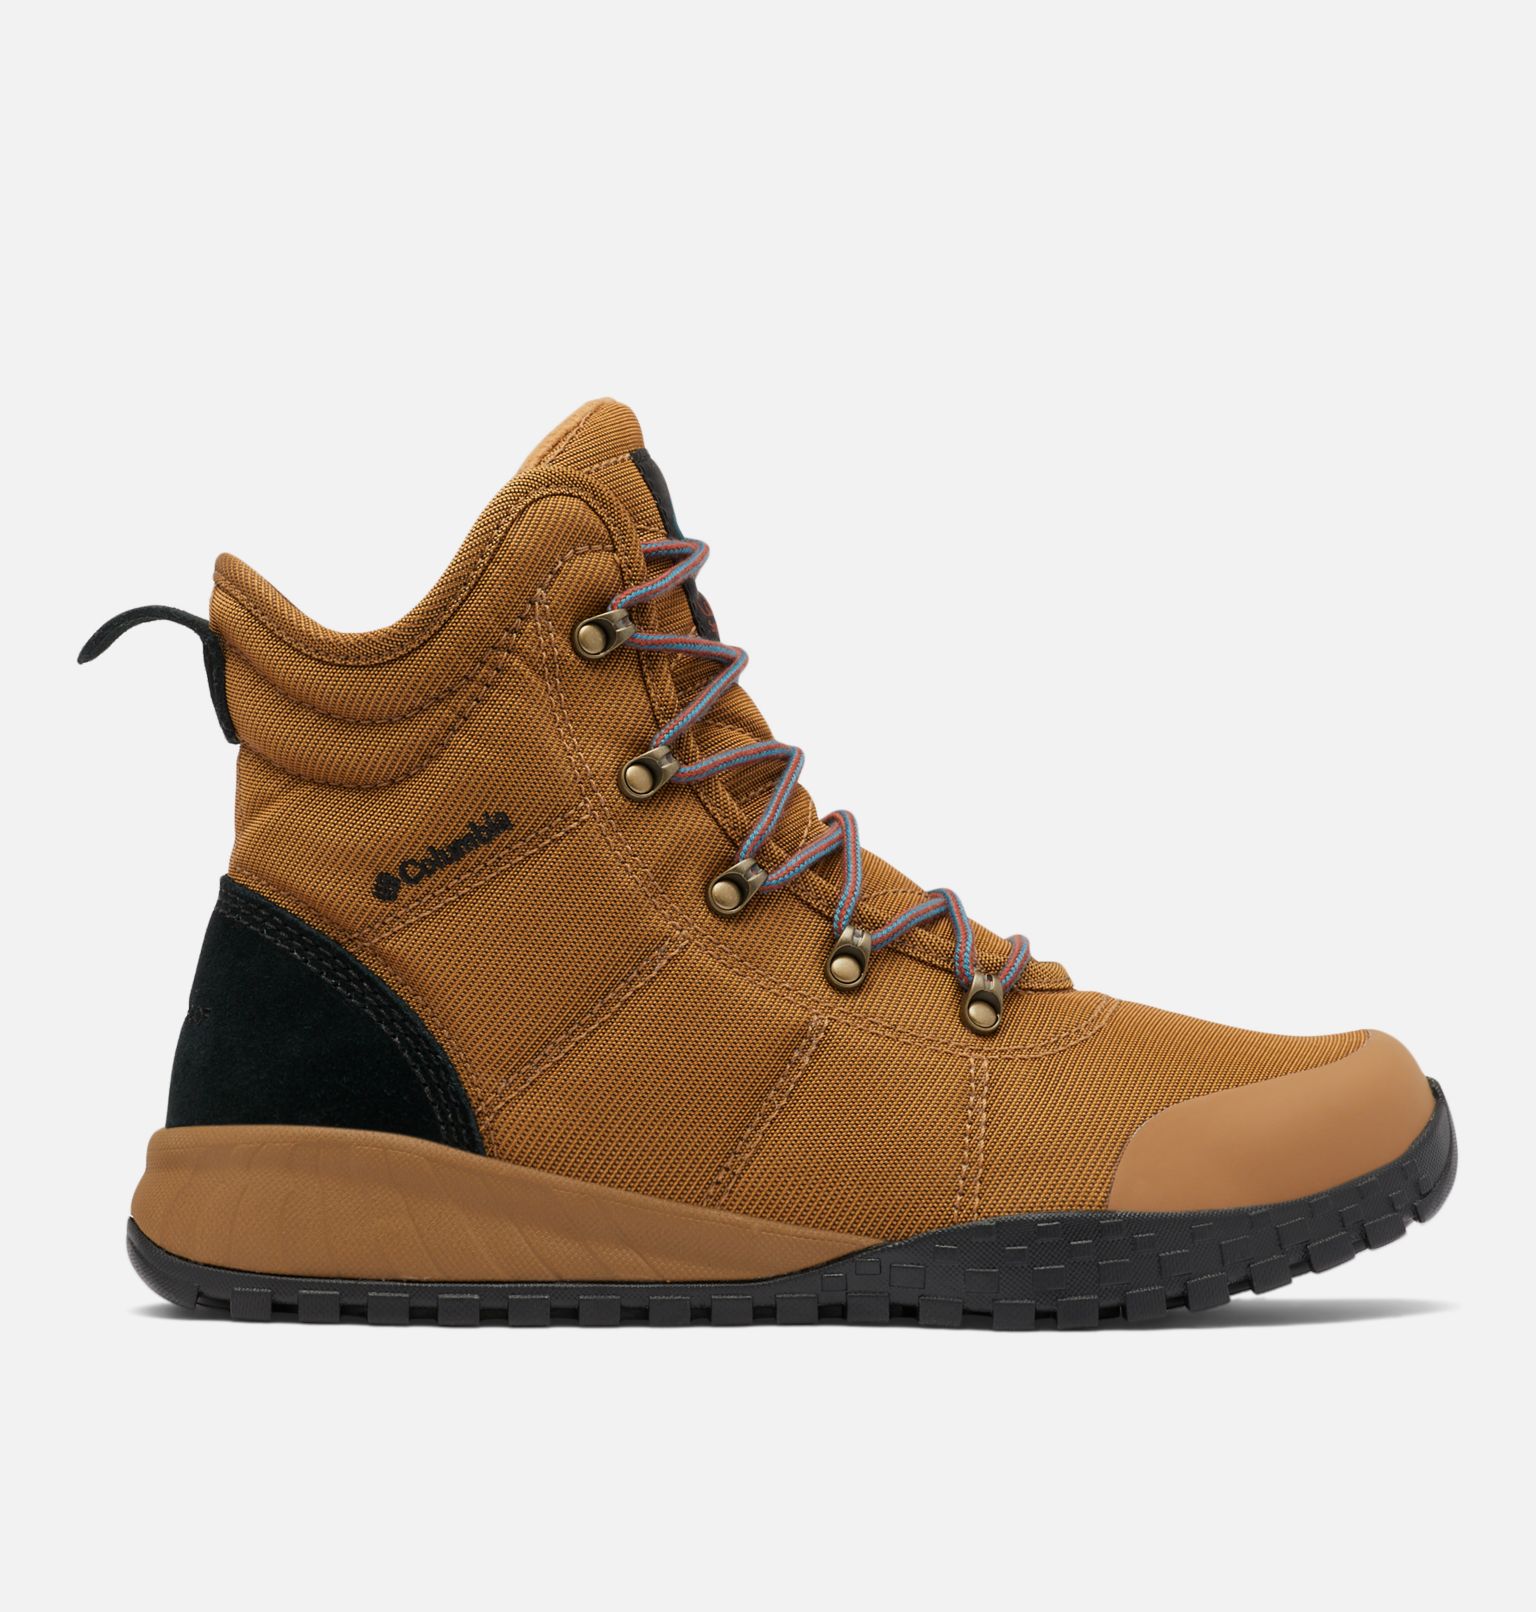 Timberland Vs Columbia (The Definitive Guide) - Unlock Wilderness